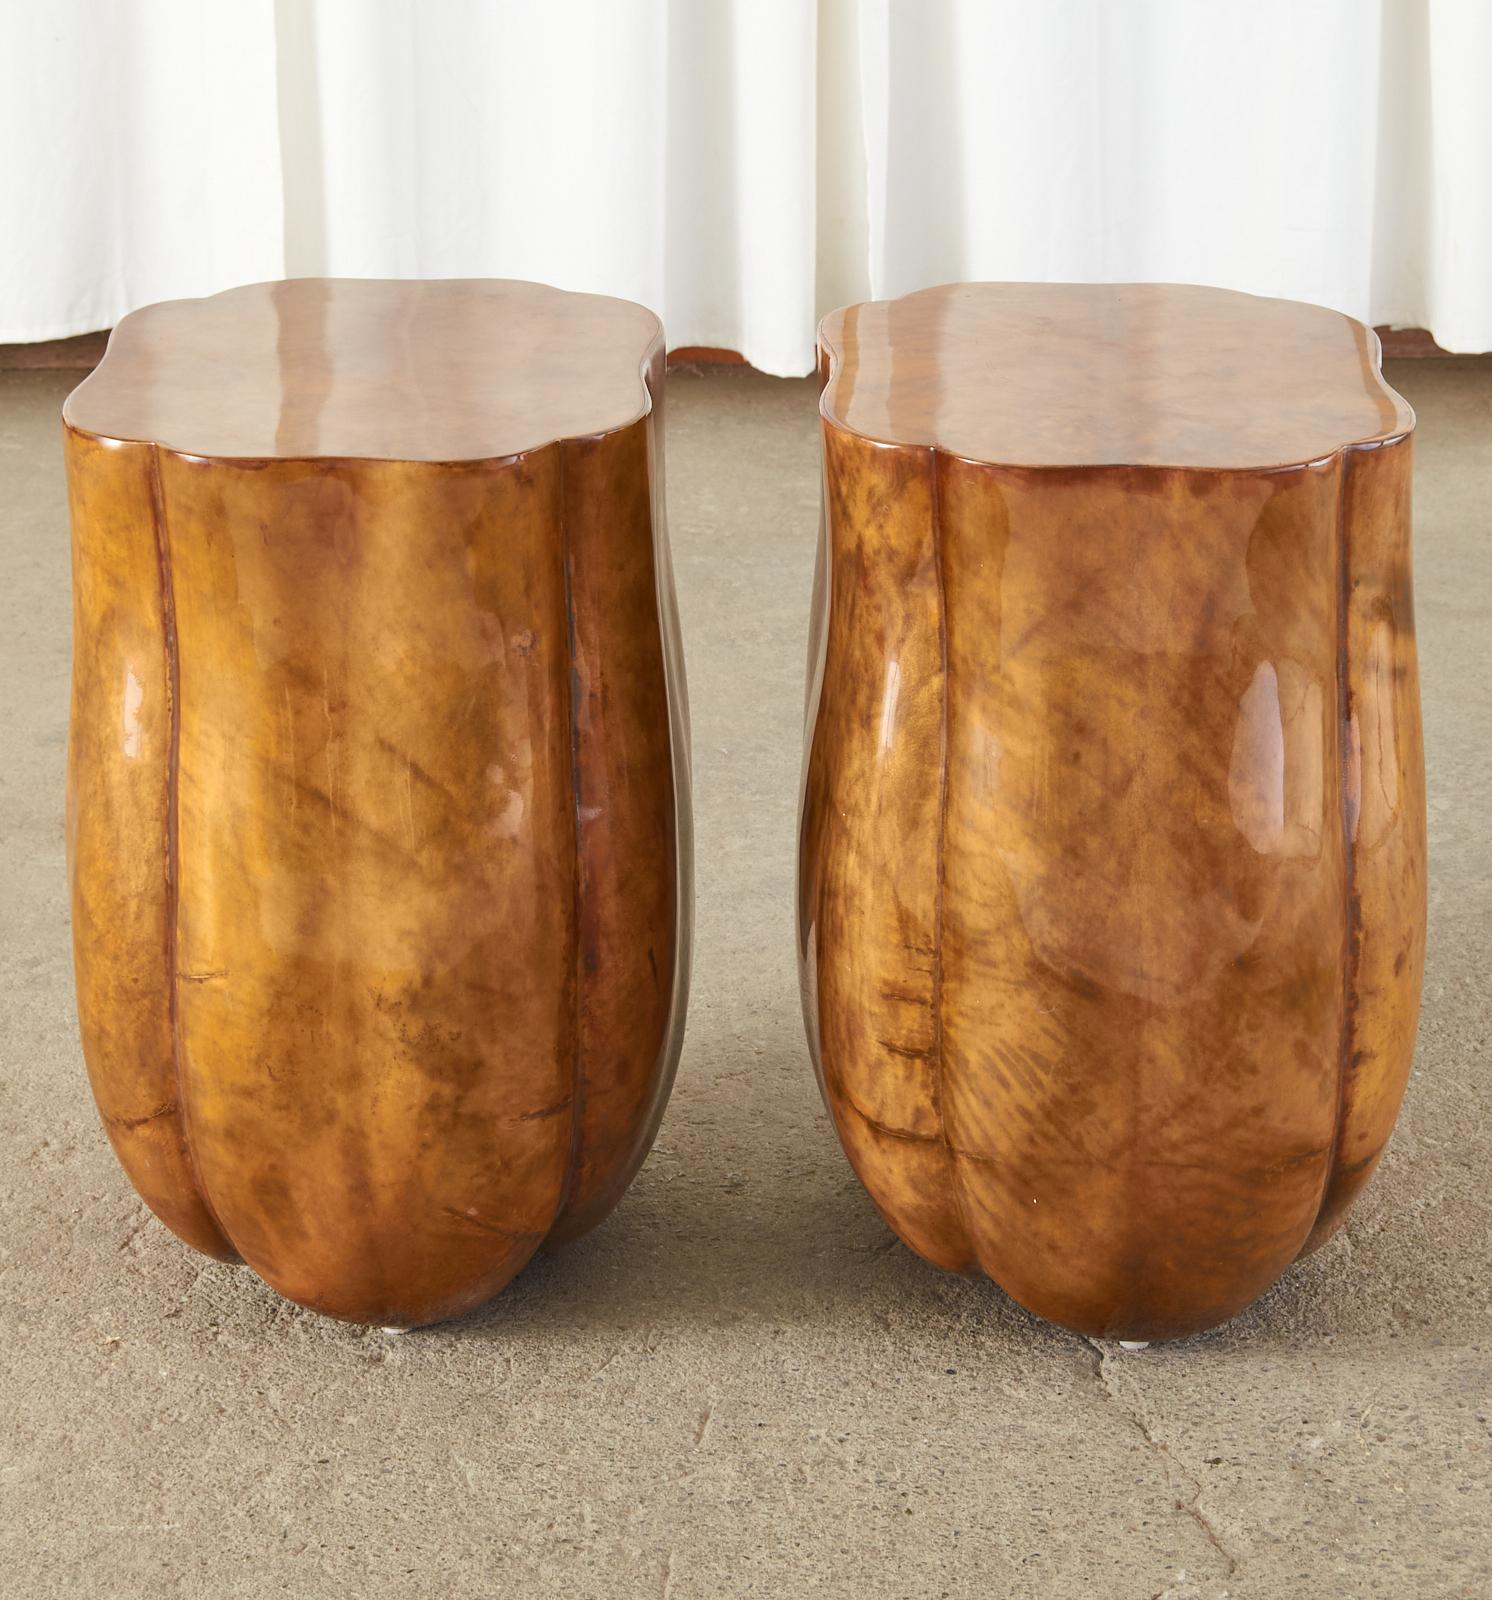 Organic Modern Pair of Tulip Form Goatskin Side Tables or End Tables